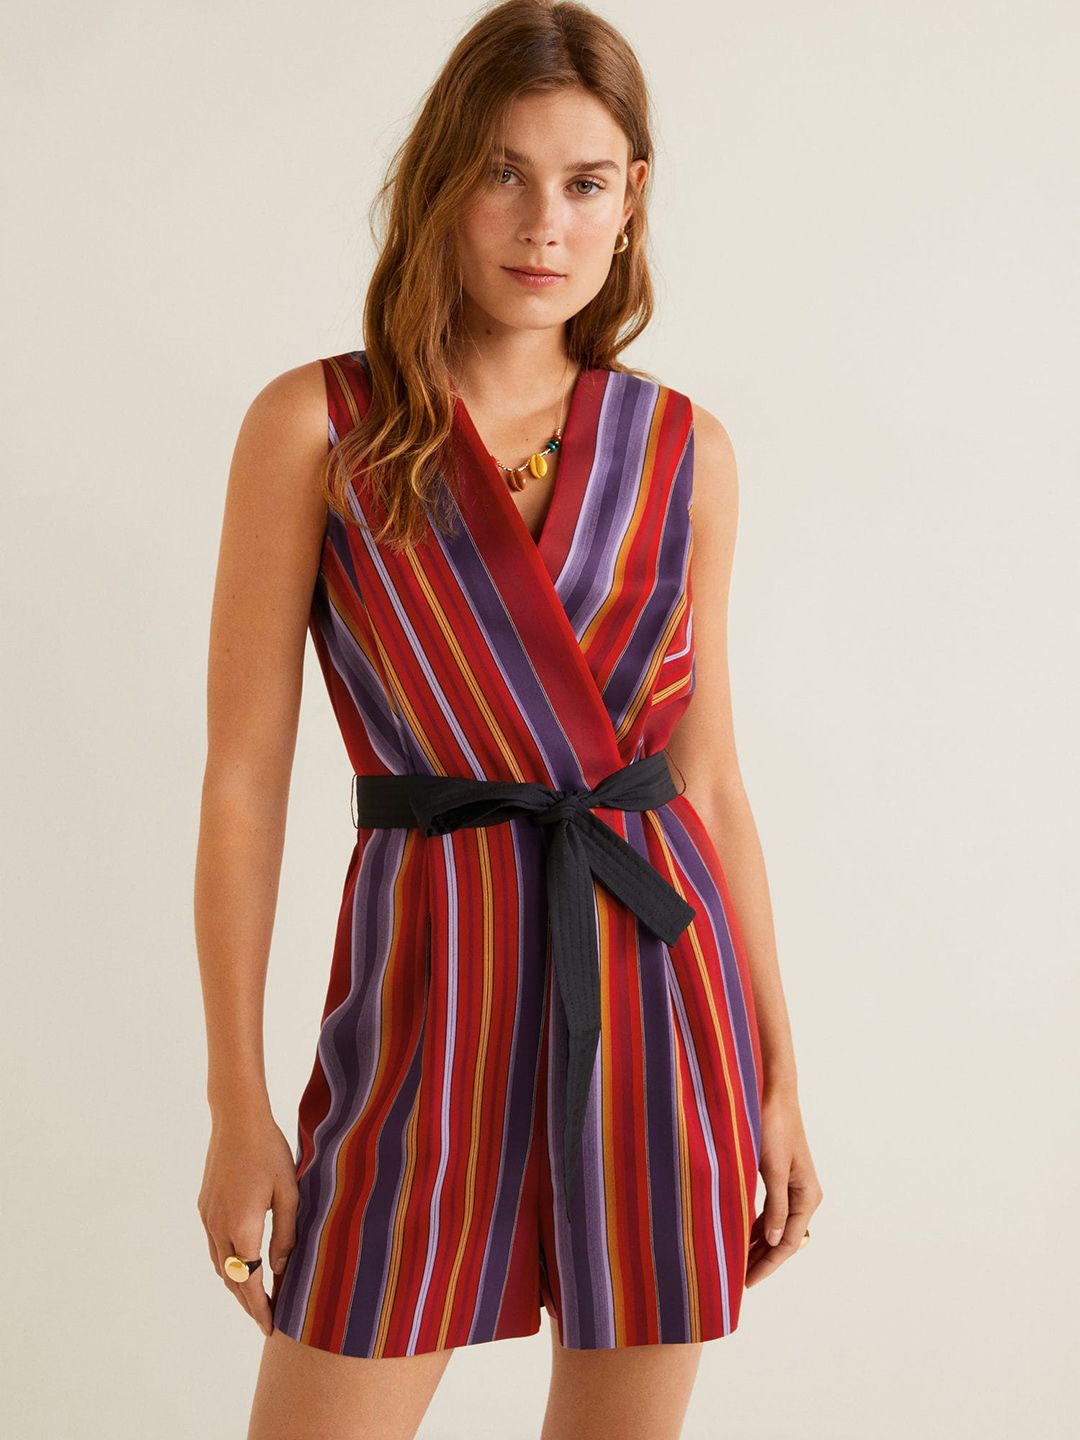 MANGO Women Red & Purple Striped Playsuit Price in India